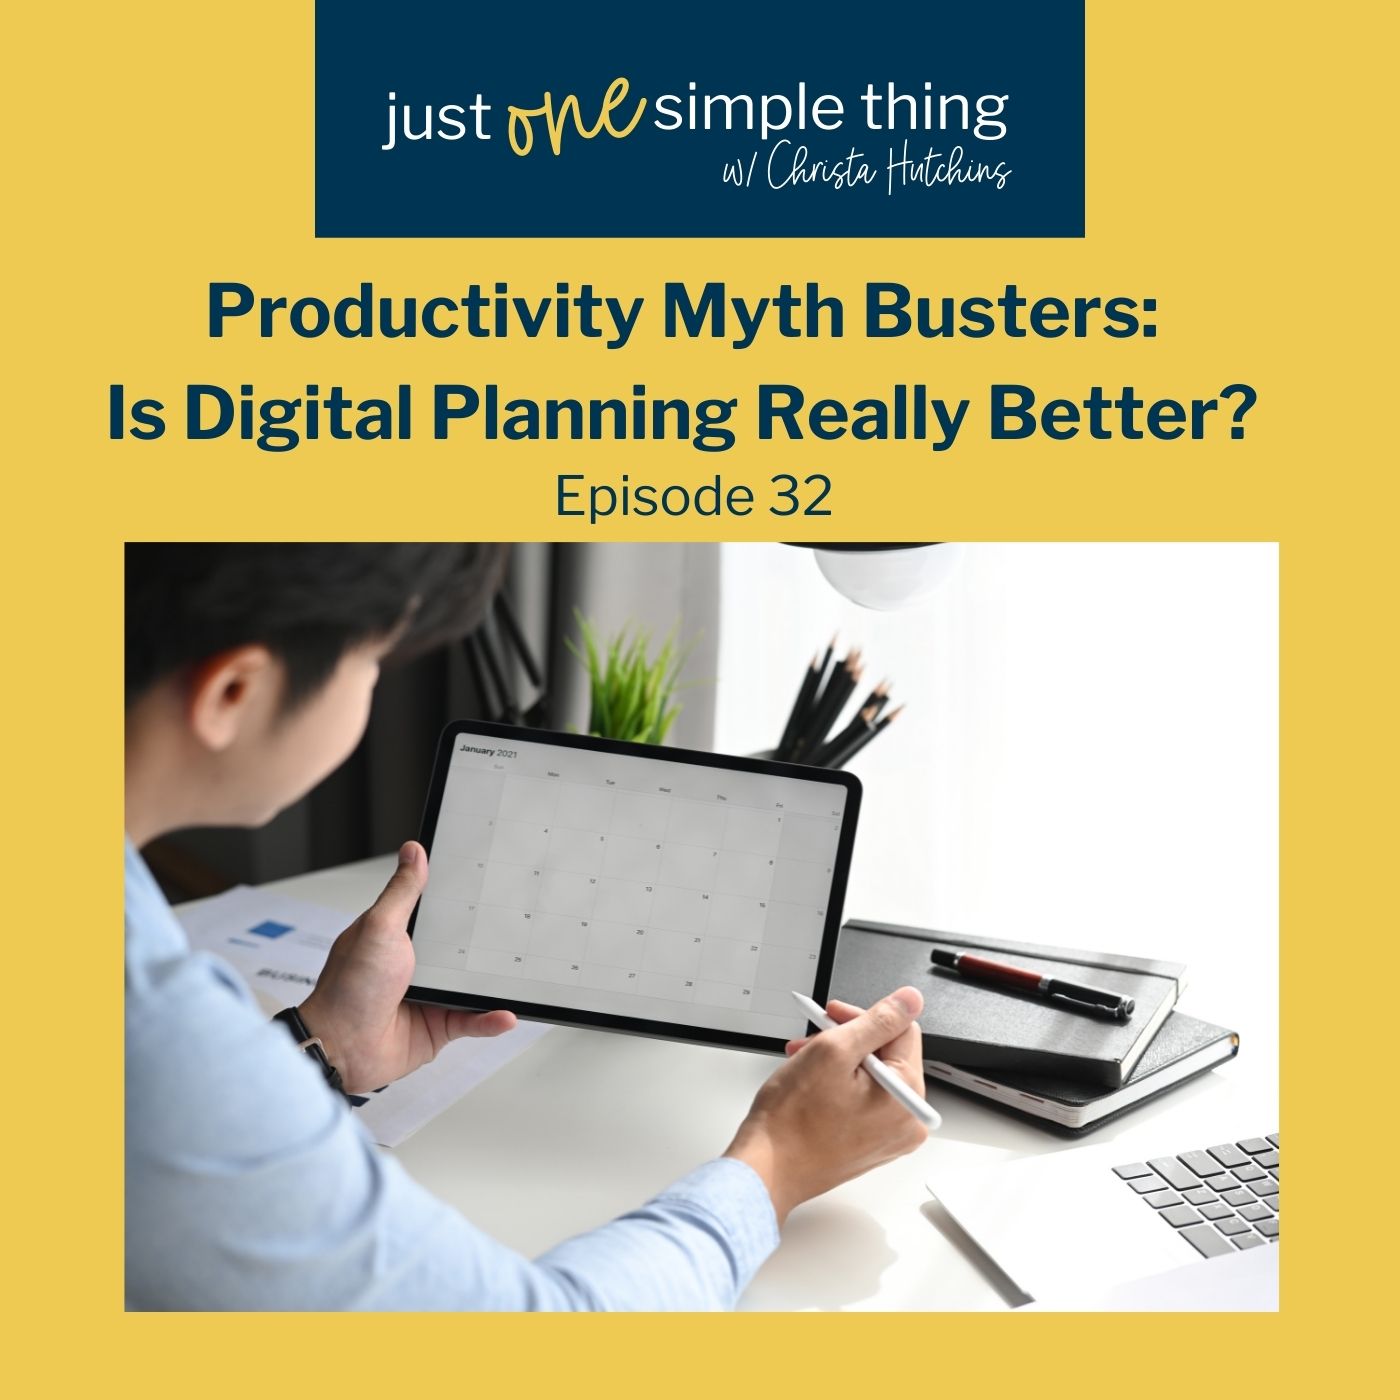 Productivity Myth Busters: Is Digital Planning Really the Best?